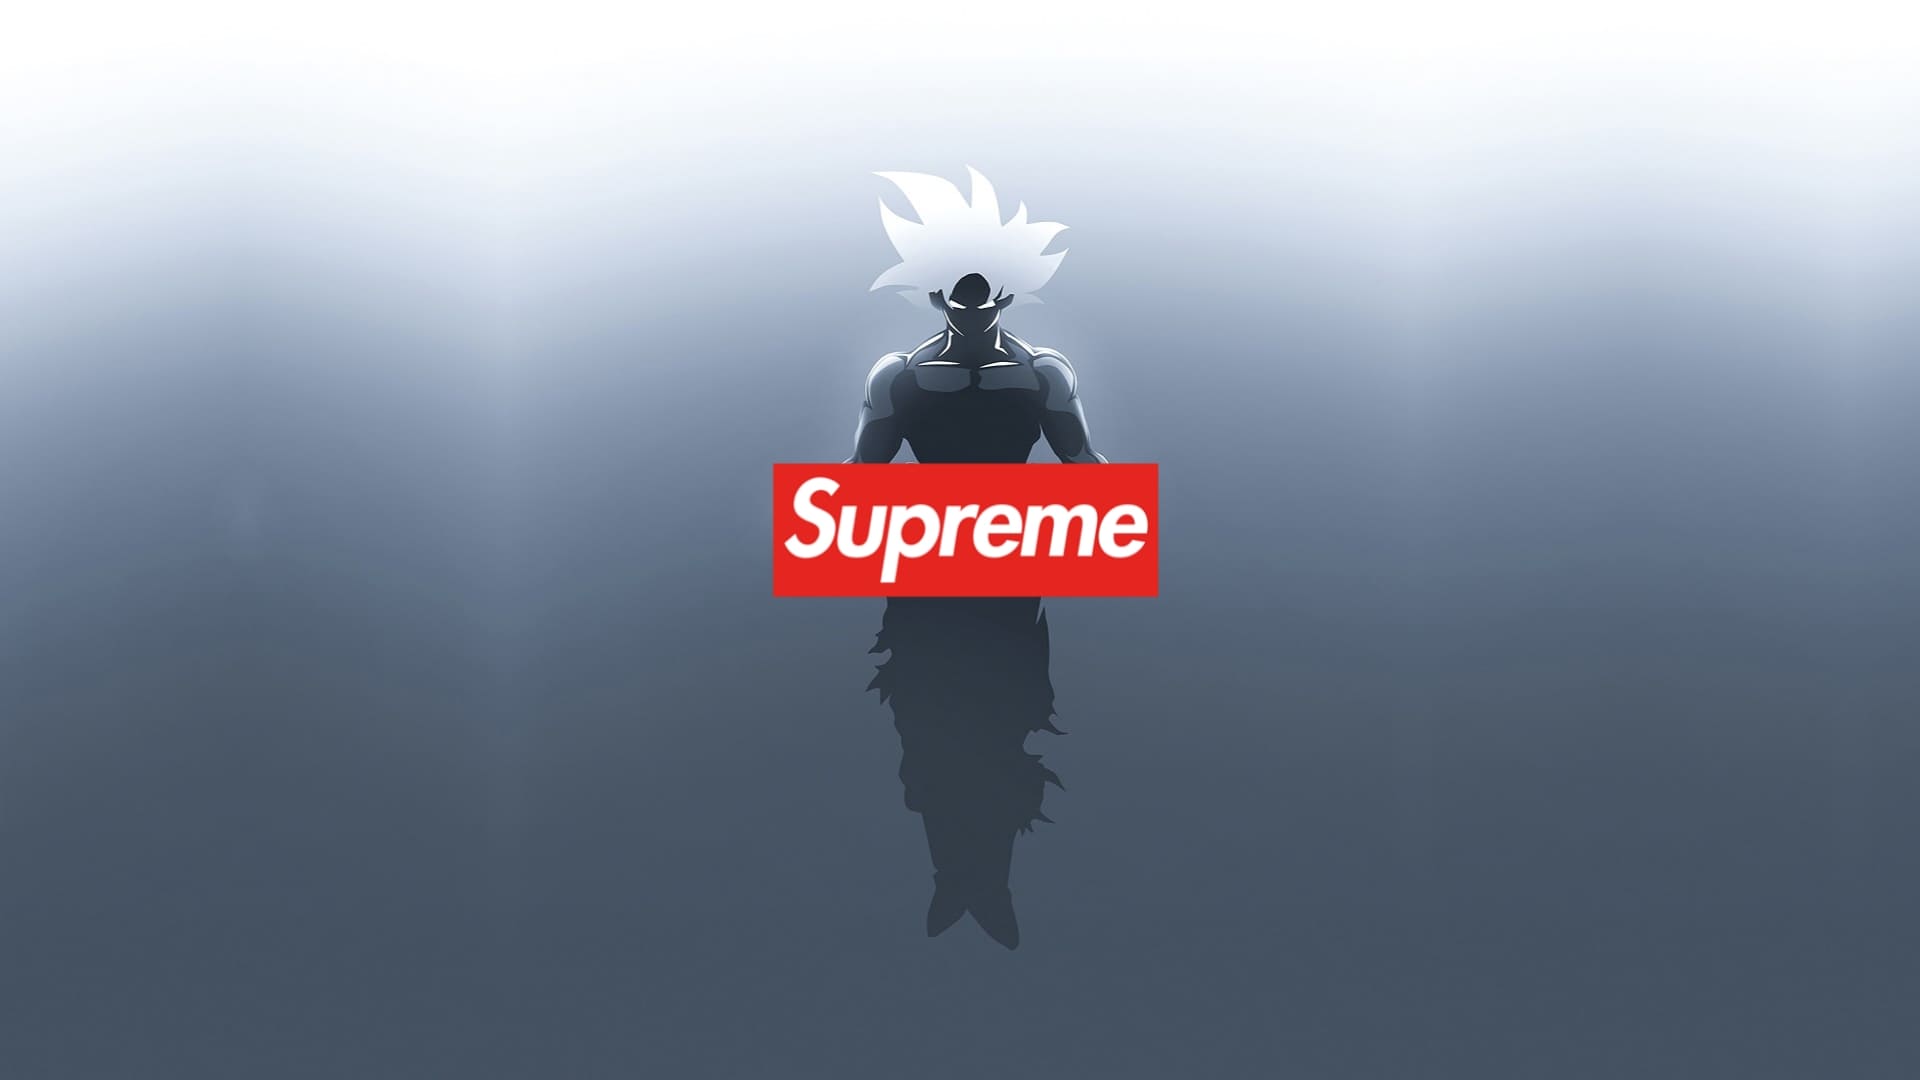 Download Show off your swagger with Supreme Drips stylish streetwear  Wallpaper  Wallpaperscom